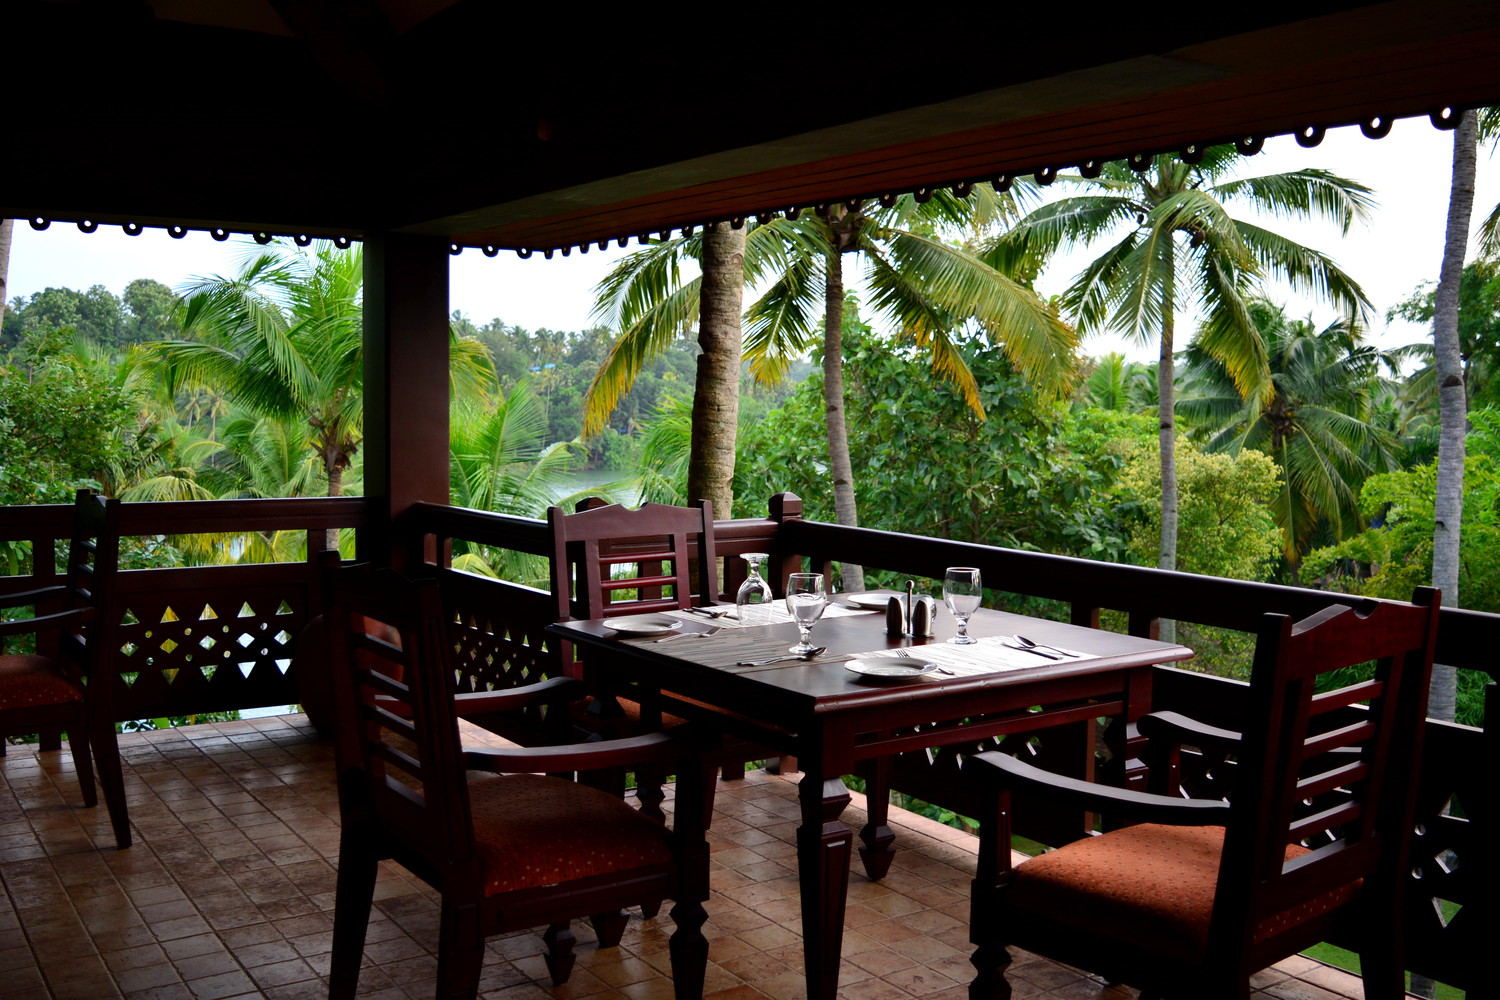 An open-air restaurant surrounded by coconut palm trees and other trees